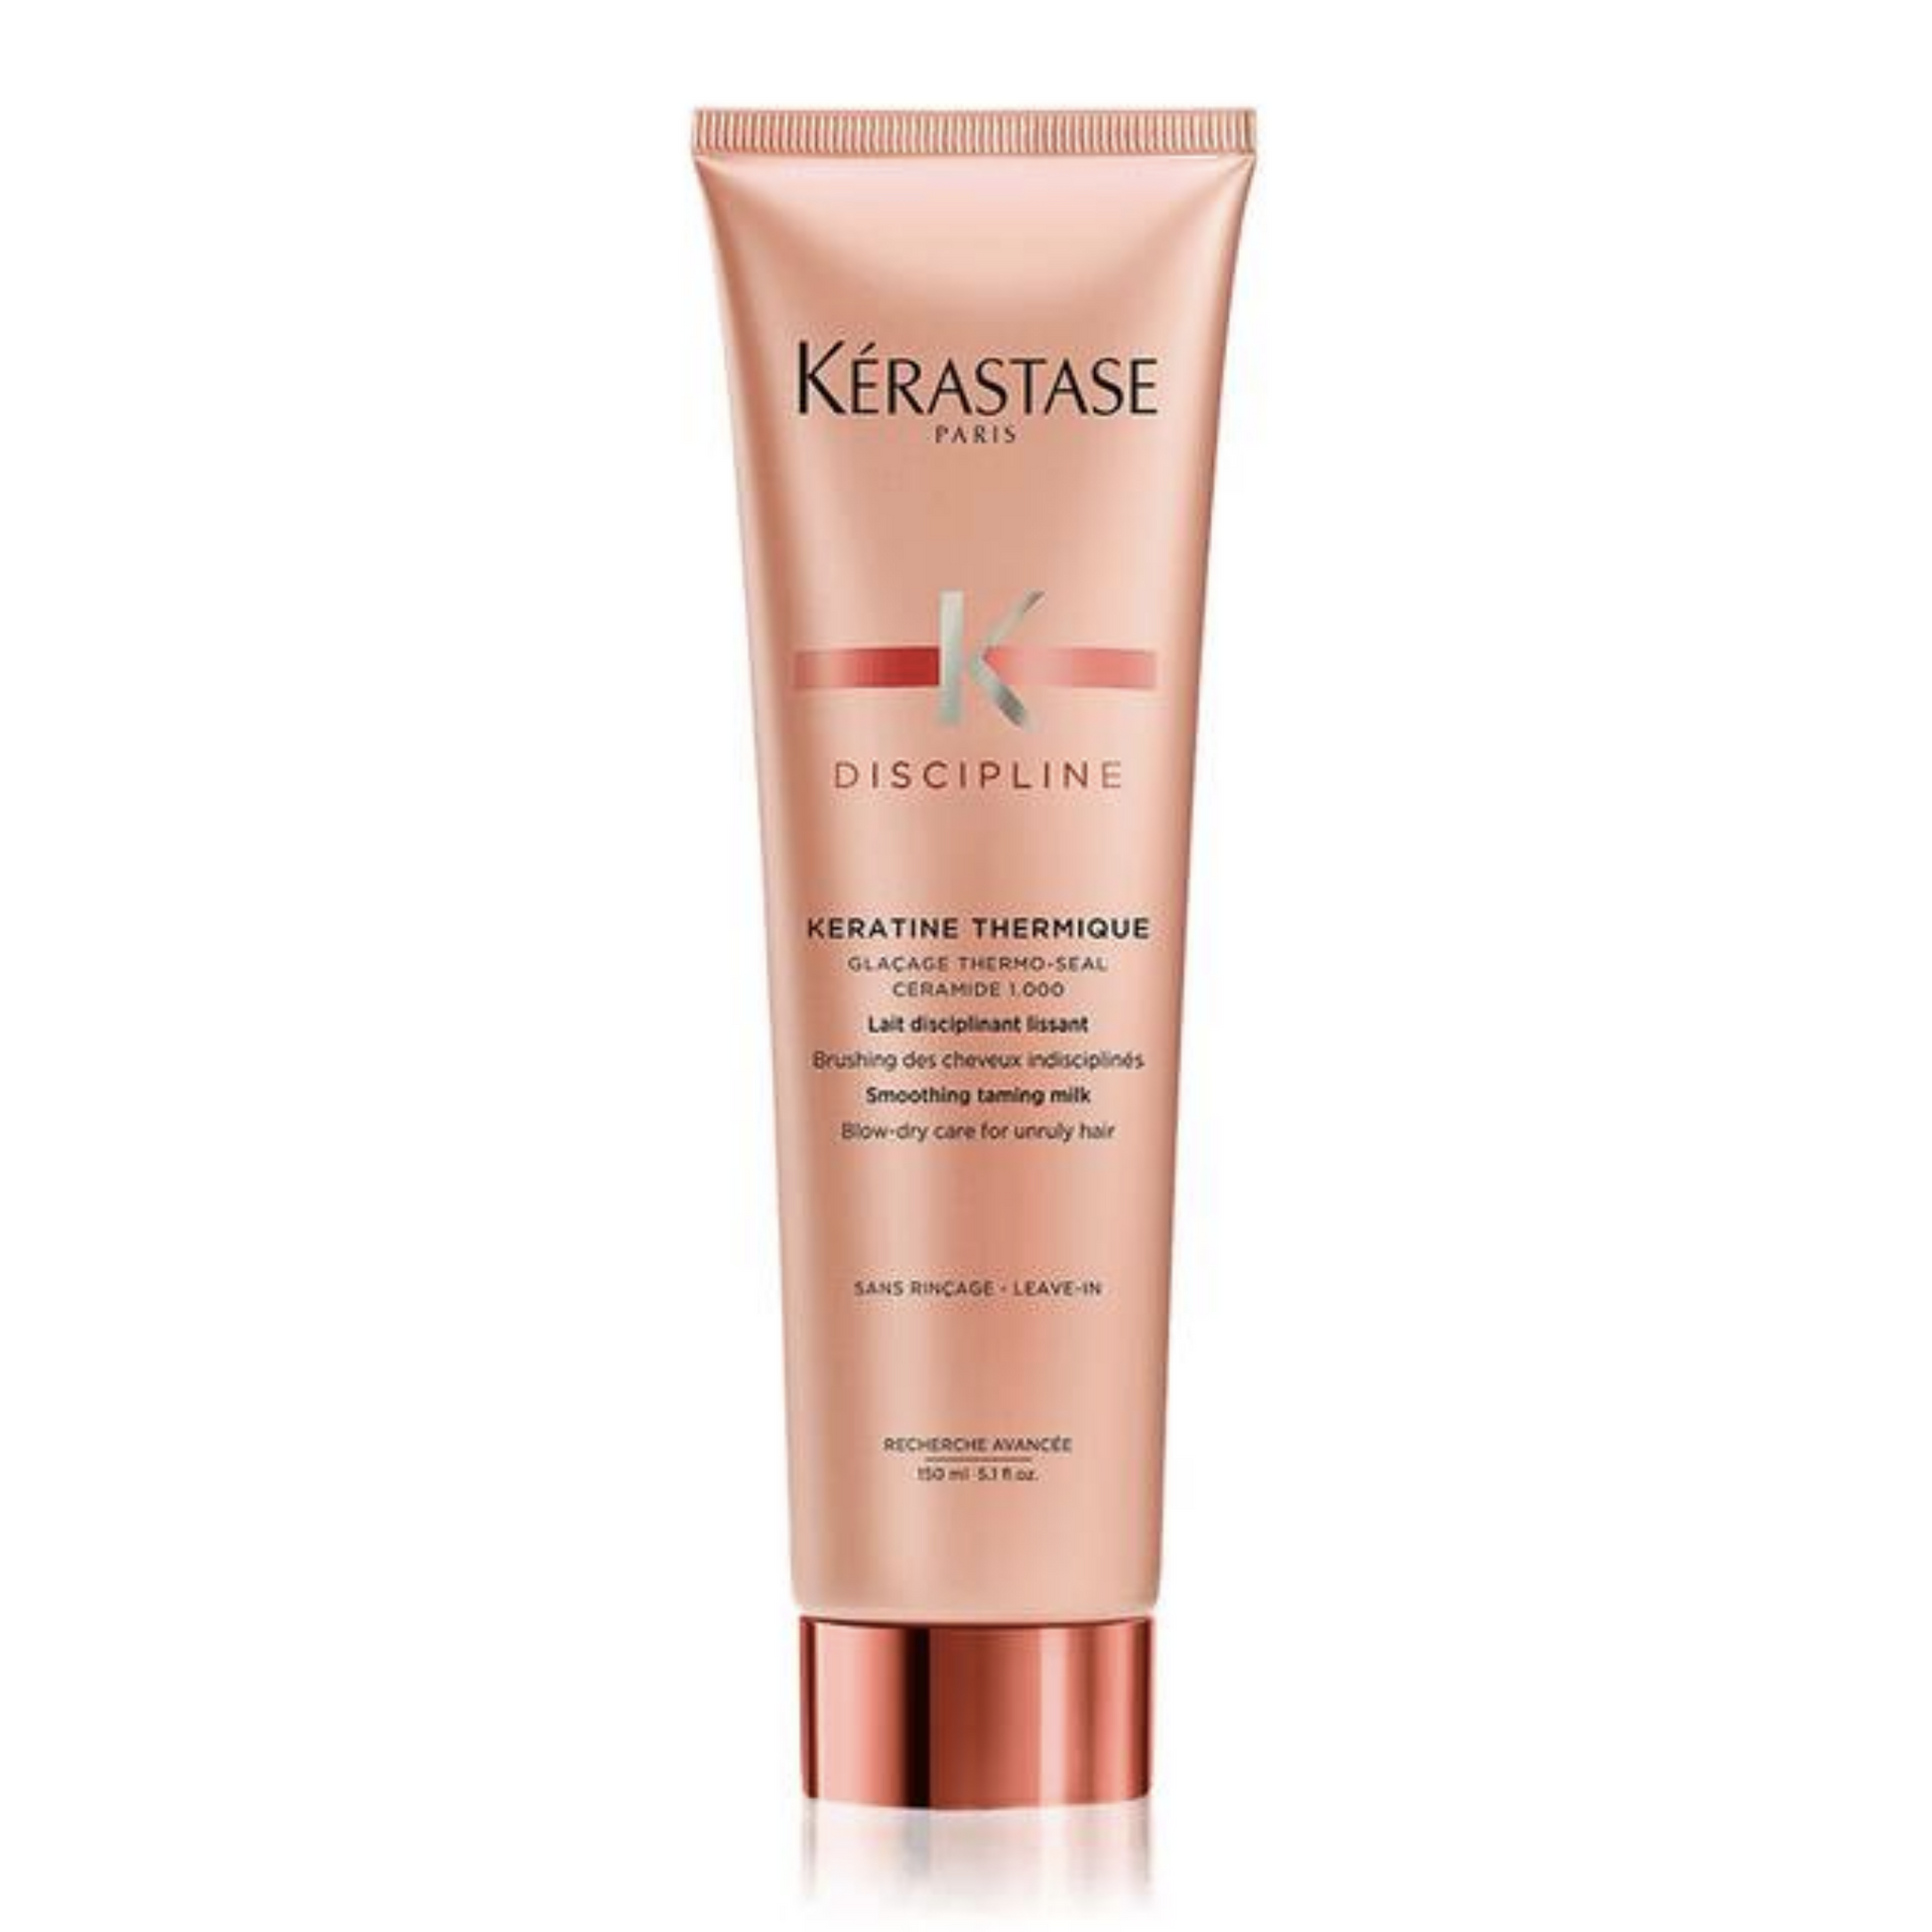 Keratine Thermique Blow Dry Primer - Taming milk that instantly smooths away frizzy hair & protects the hair fiber.